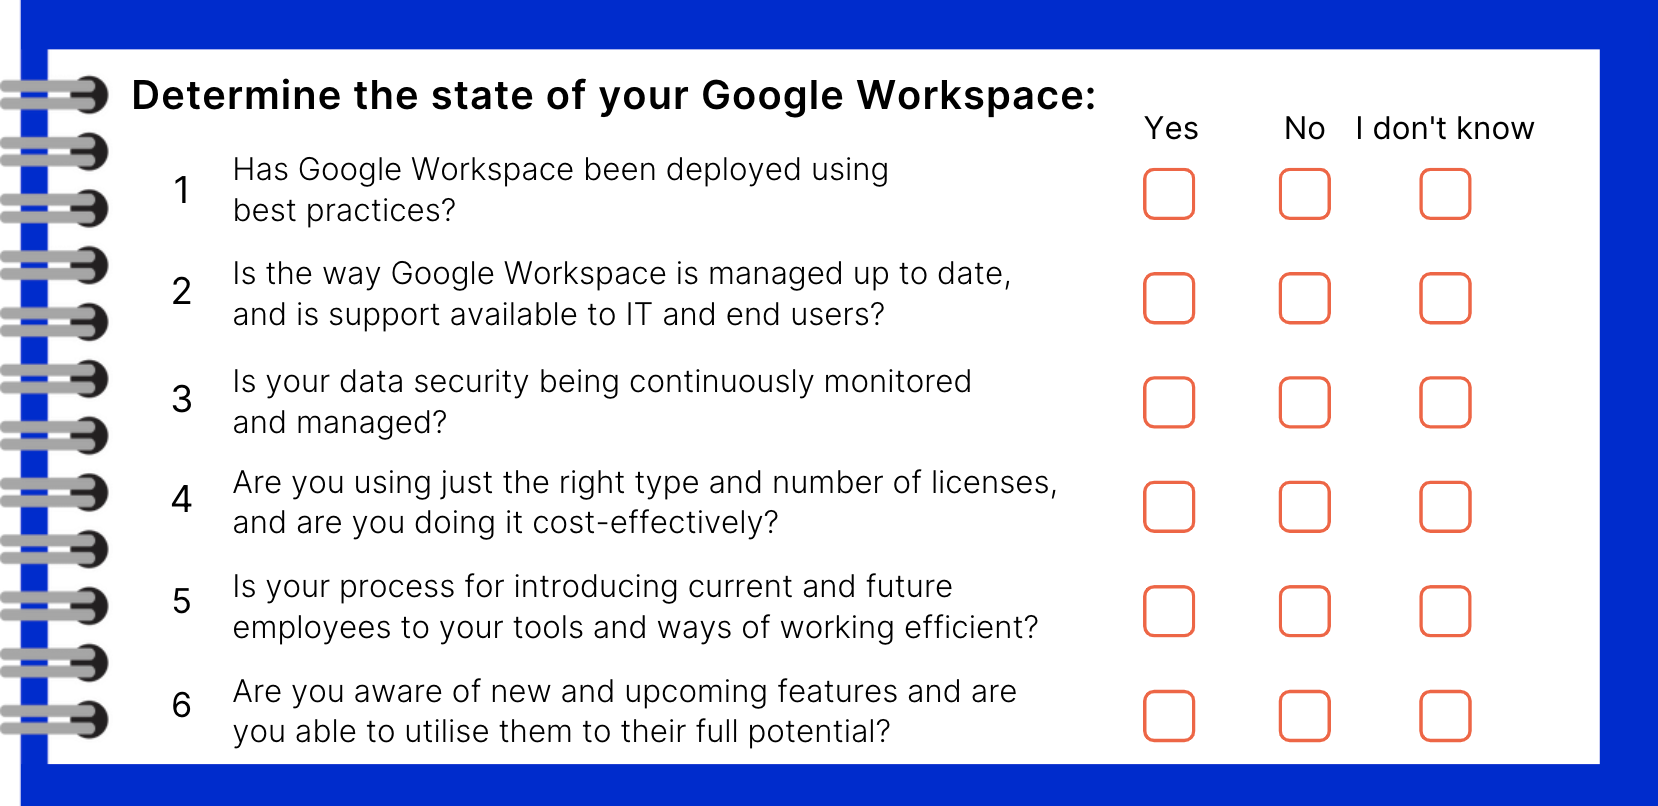 Determine the state of your Google Workspace